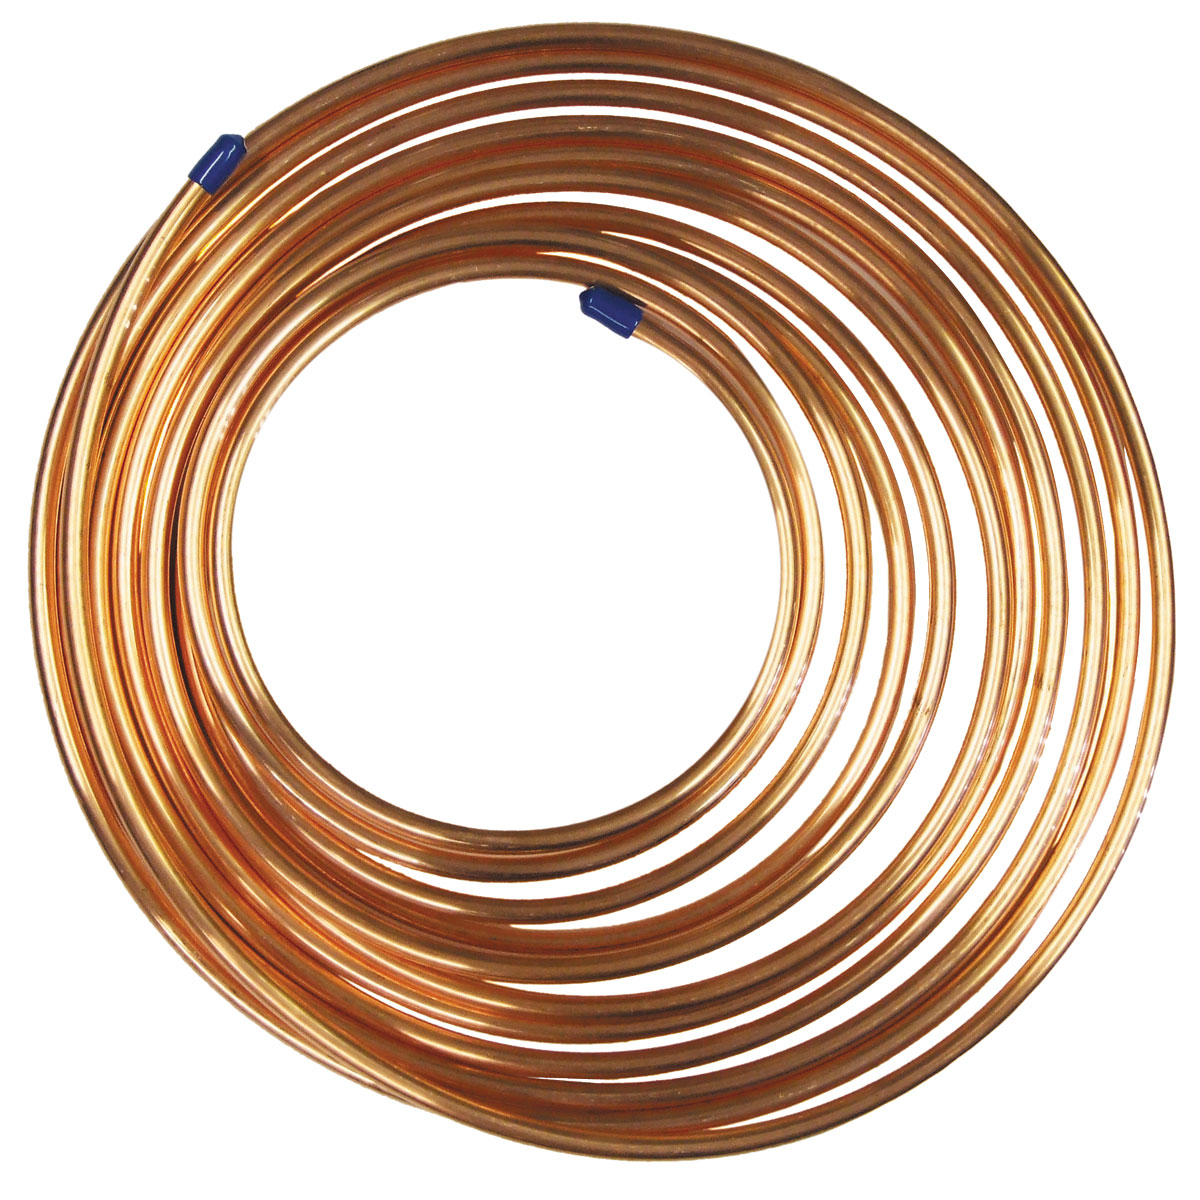 12mm OD Copper Tube (10mtrs)